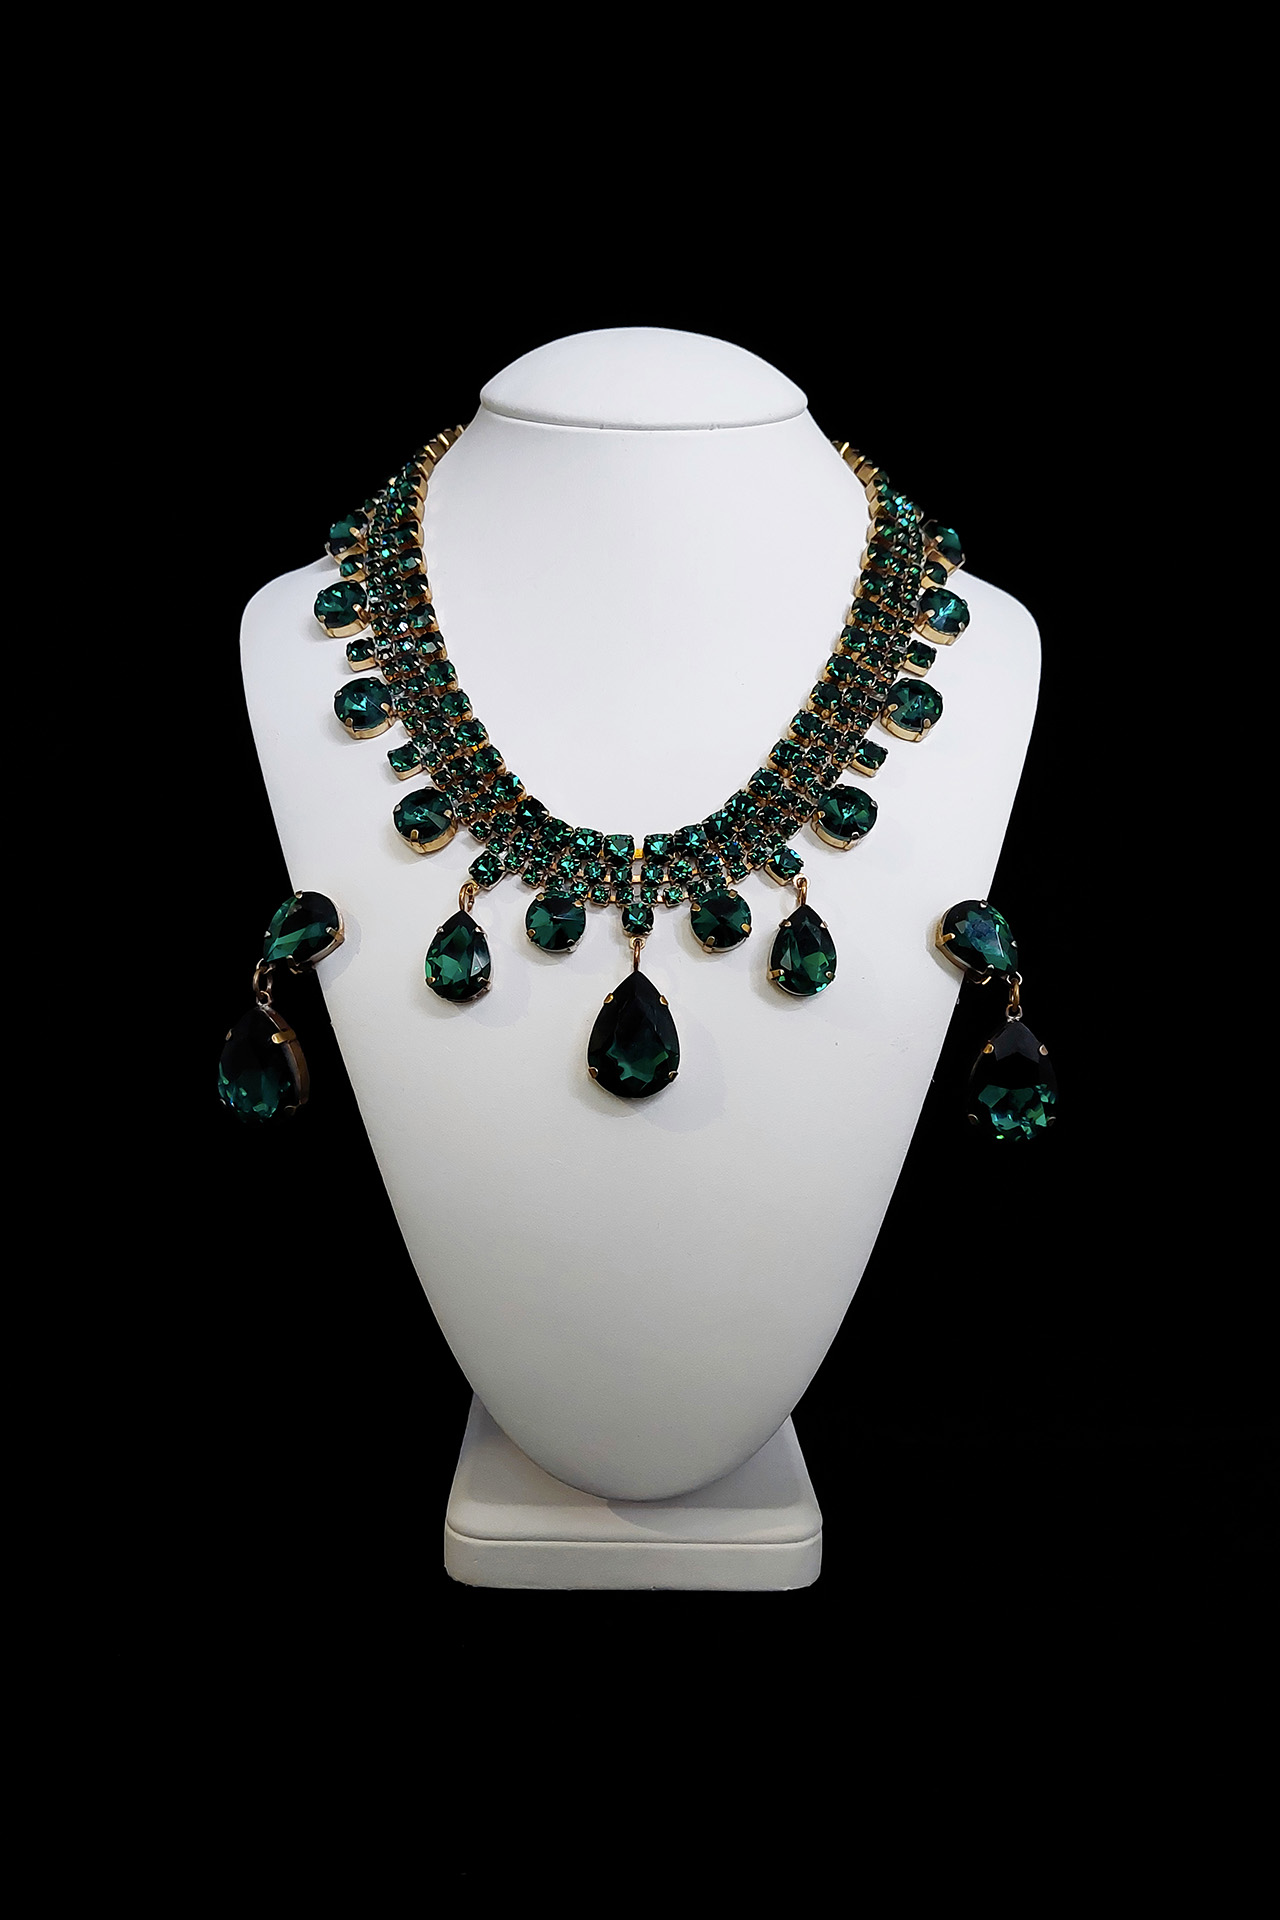 Necklace and earrings Raindrops from green emerald rhinestones